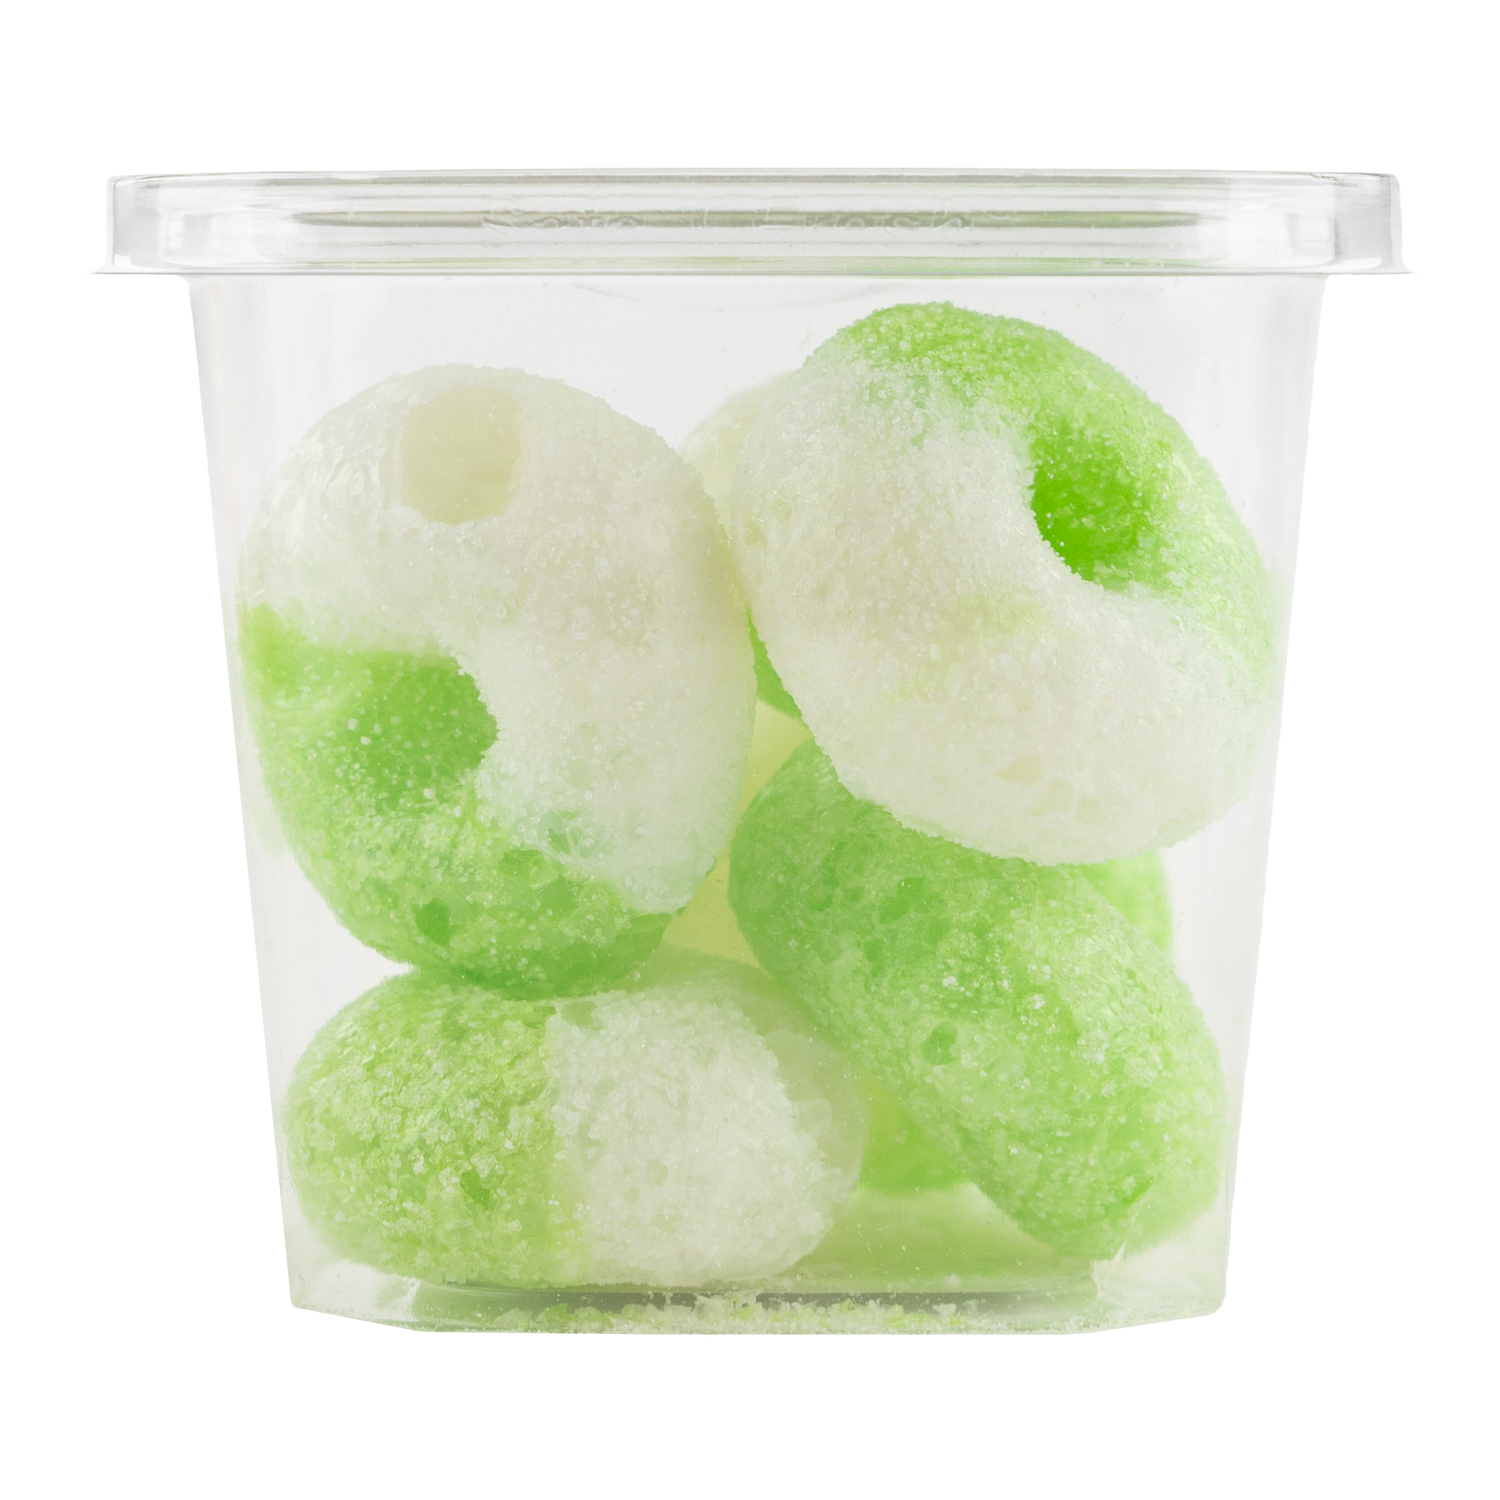 Quattro Ranch Freeze Dried Sour Apple Rings